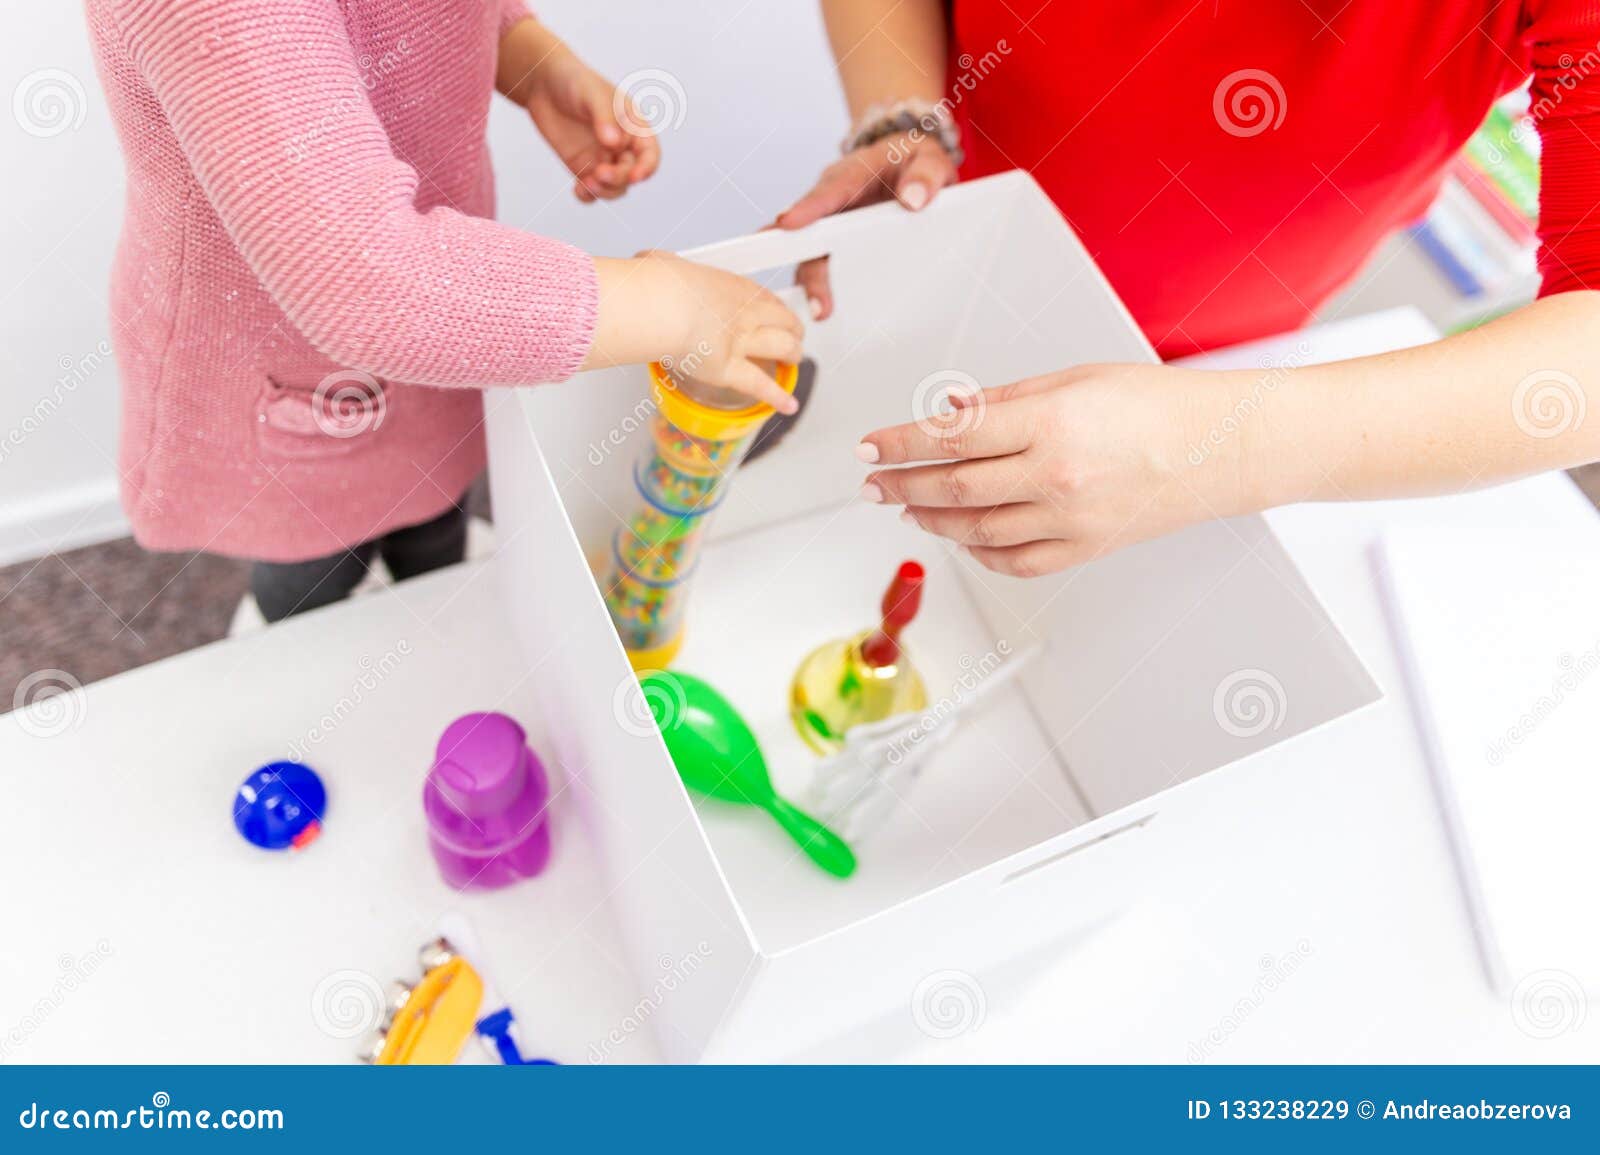 toddler girl in child occupational therapy session doing sensory playful exercises with her therapist.